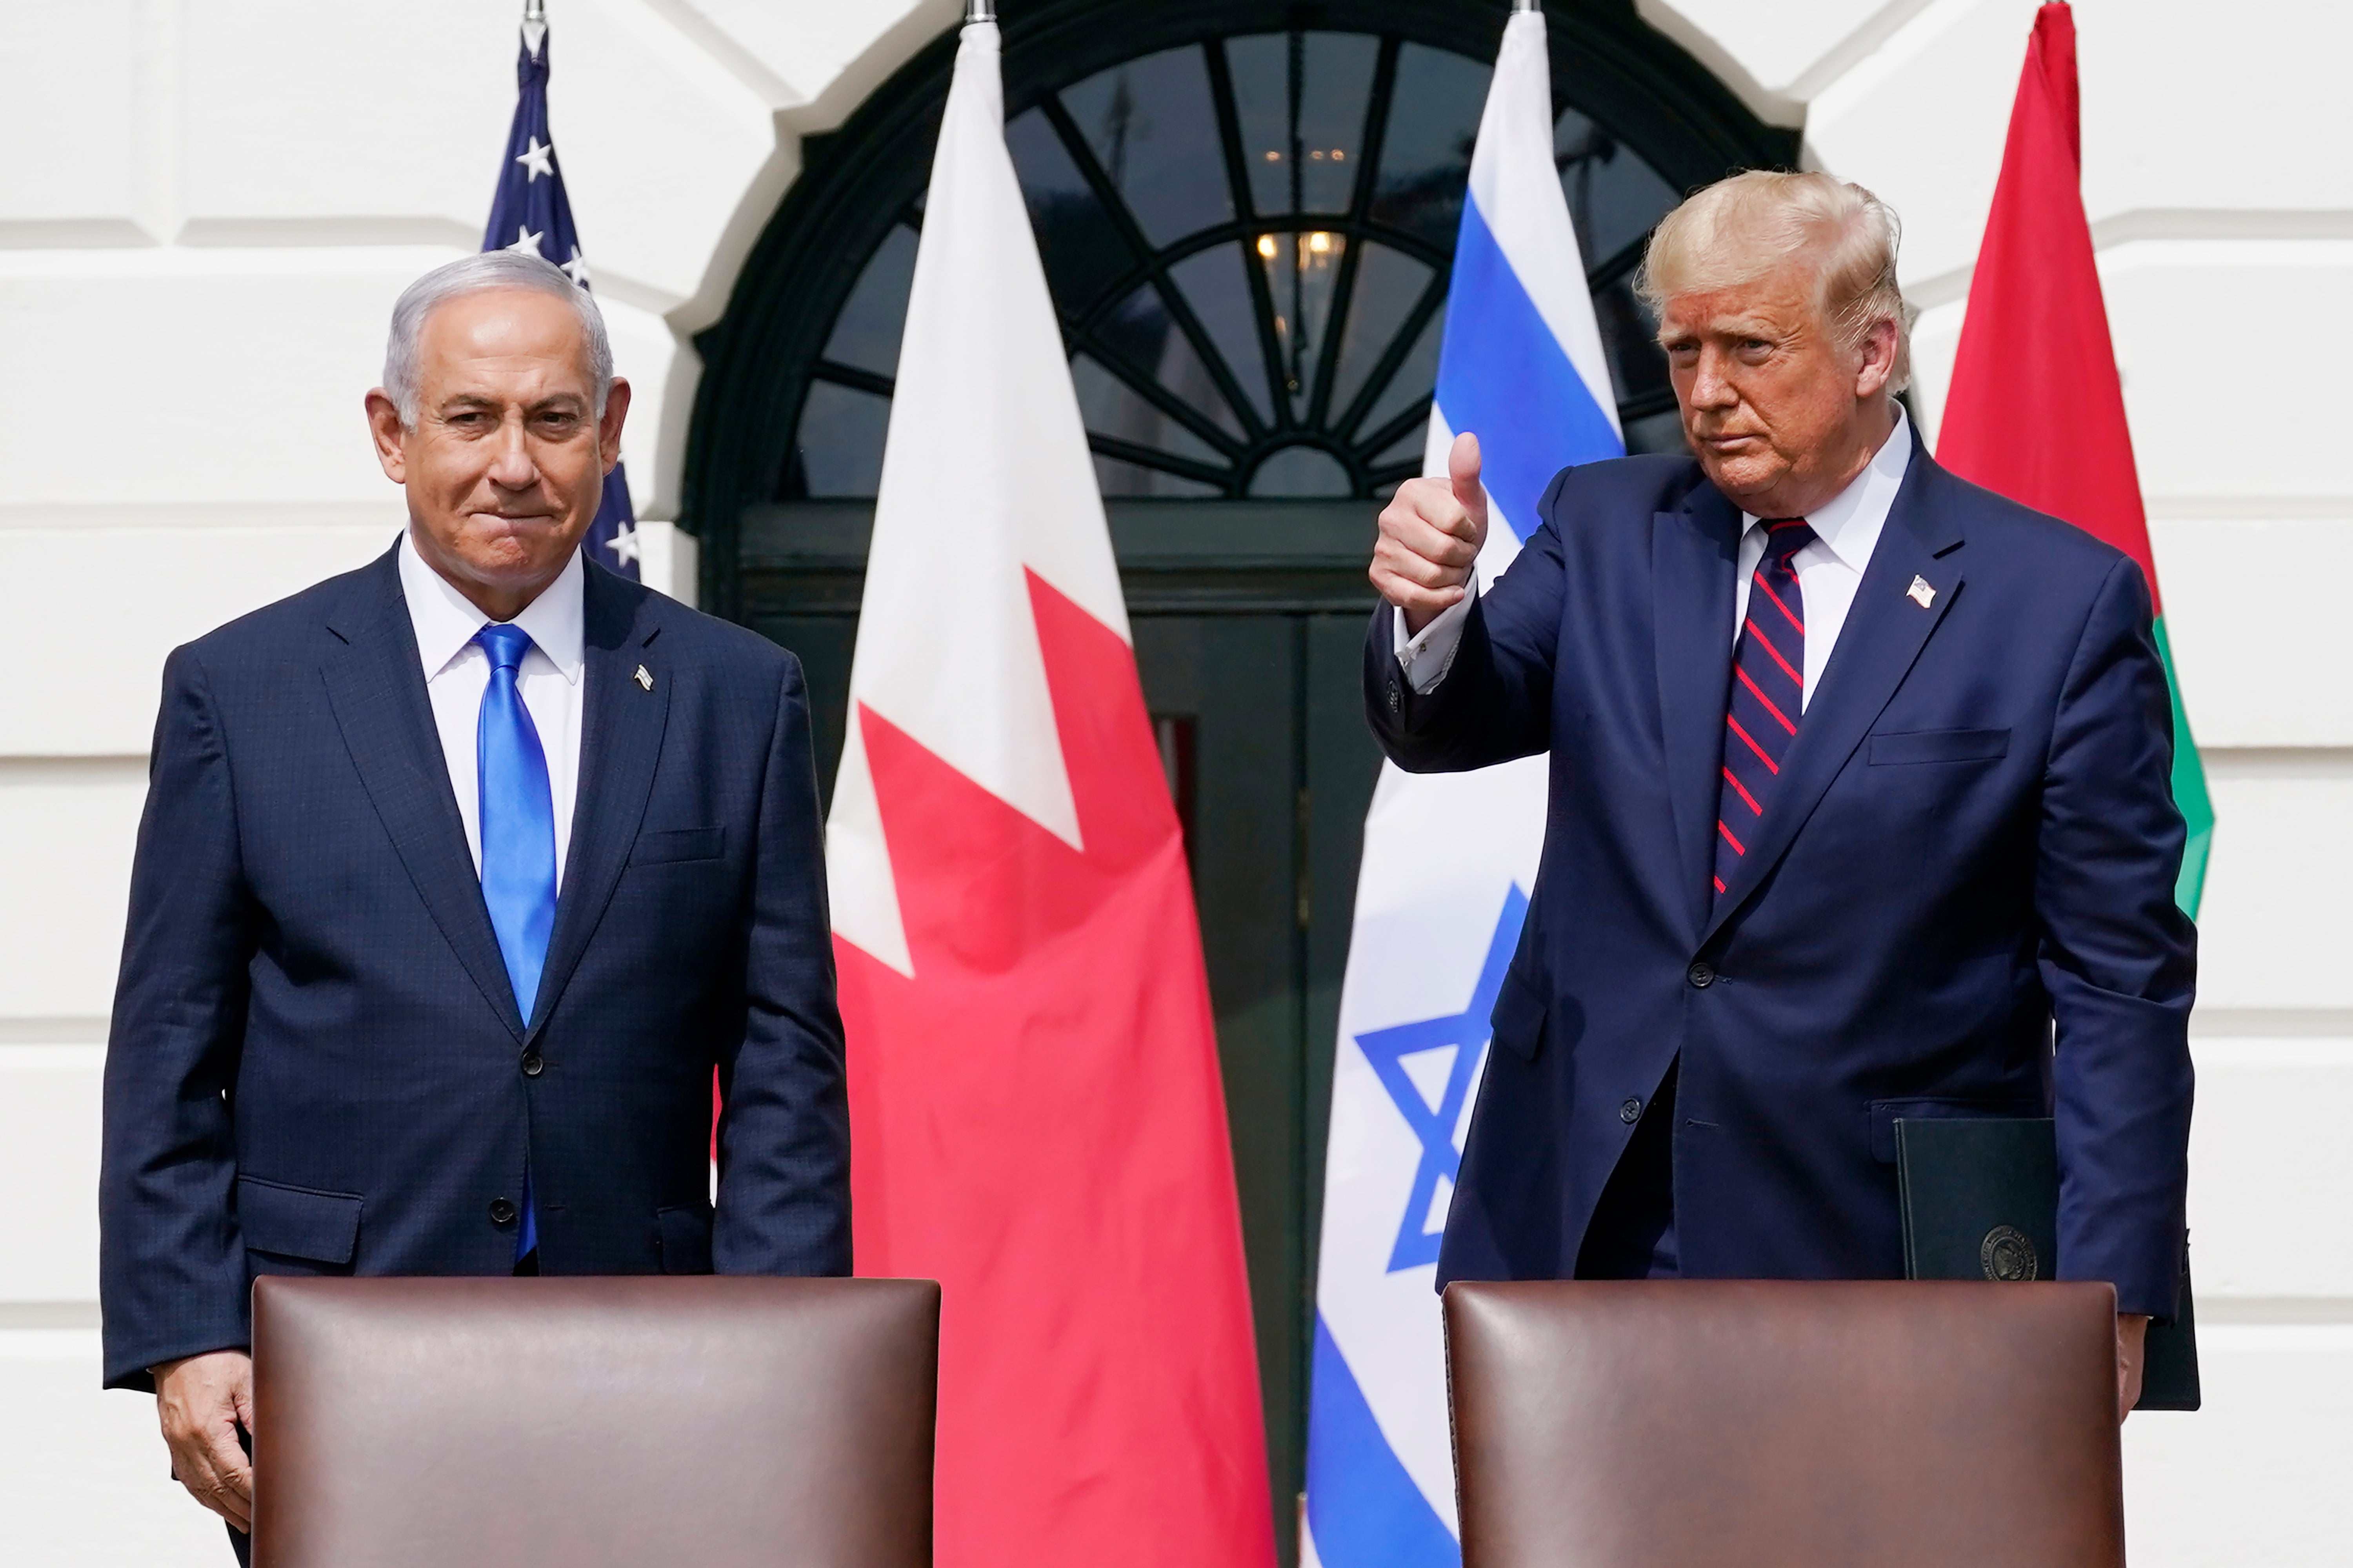 Trump and Netanyahu together in 2020